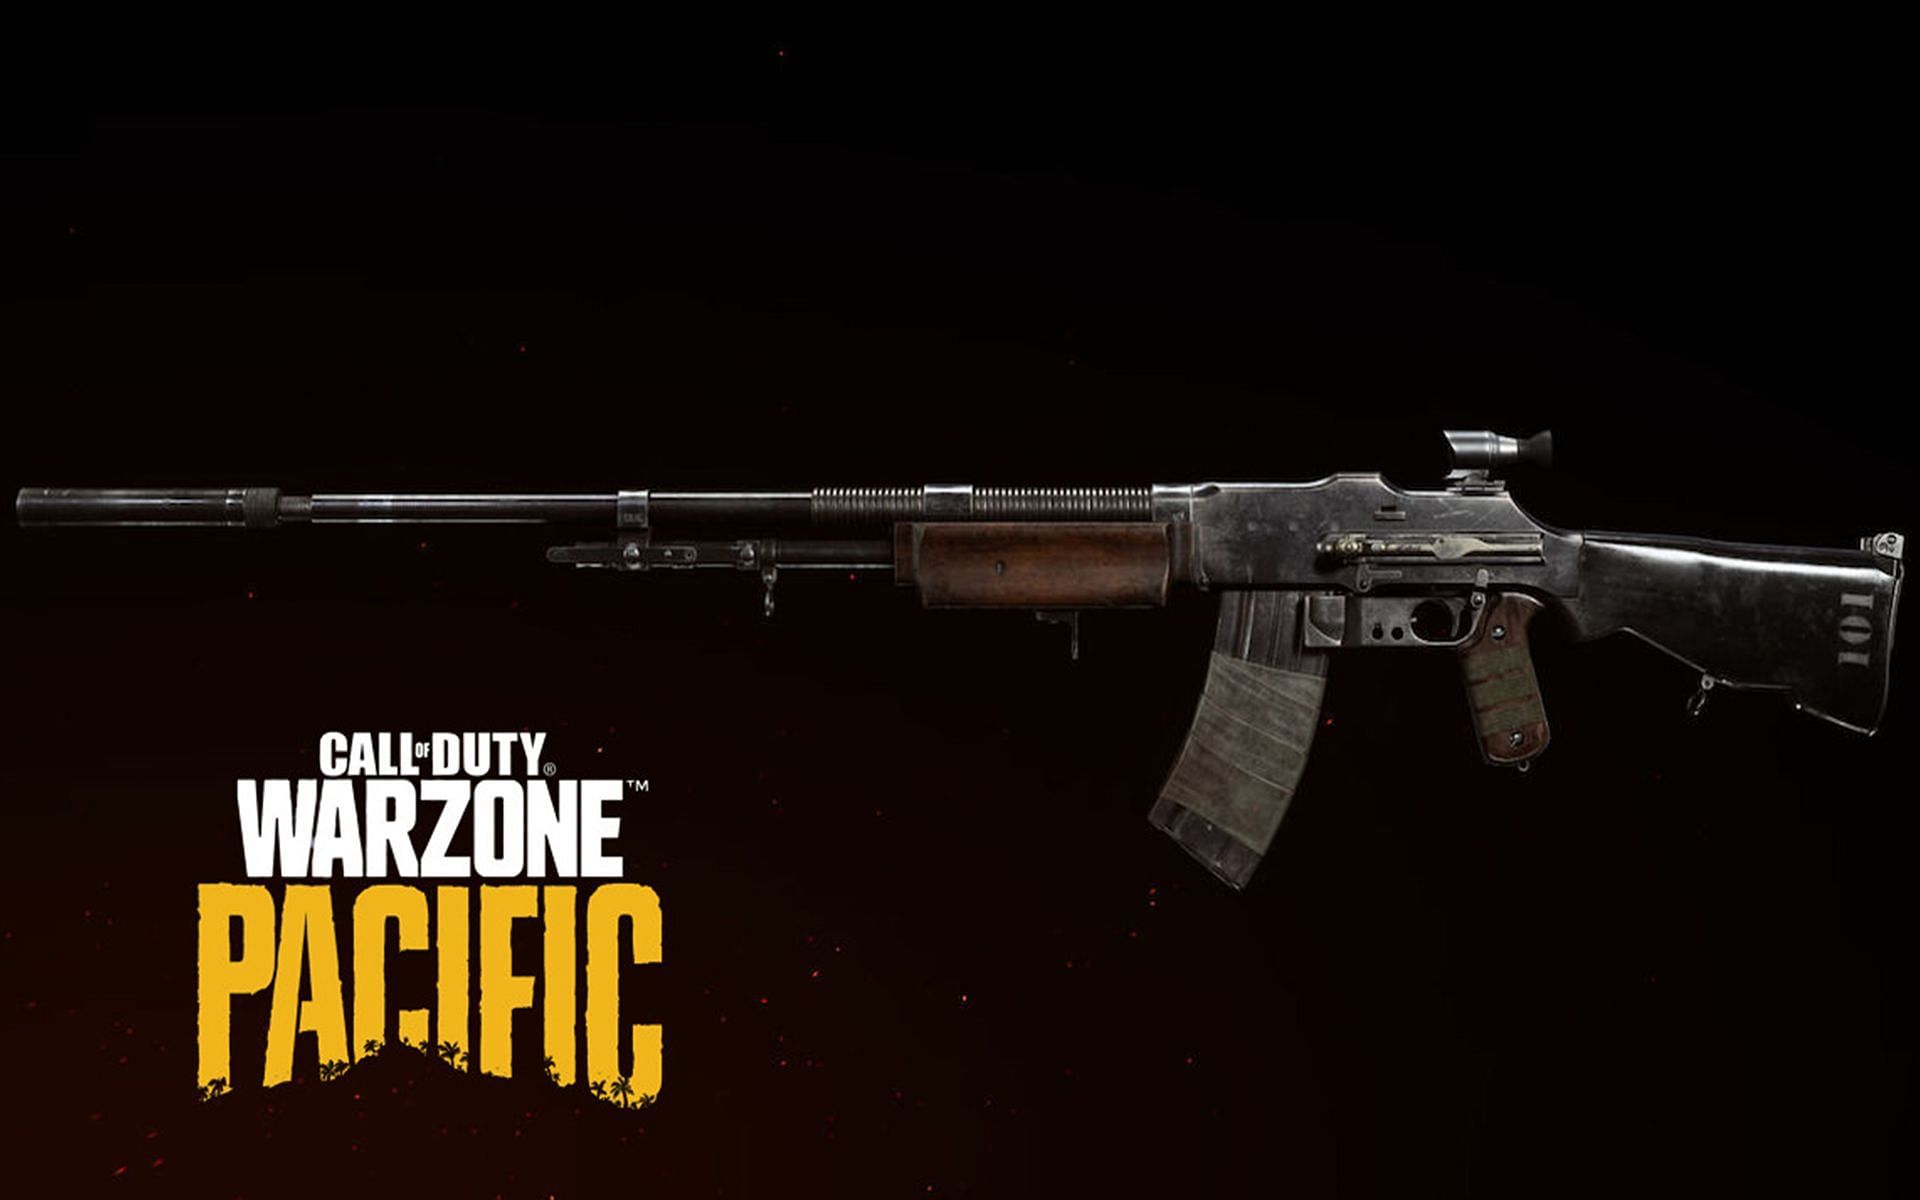 BAR assault rifle in Call of Duty: Warzone Pacific (Image via Activision)